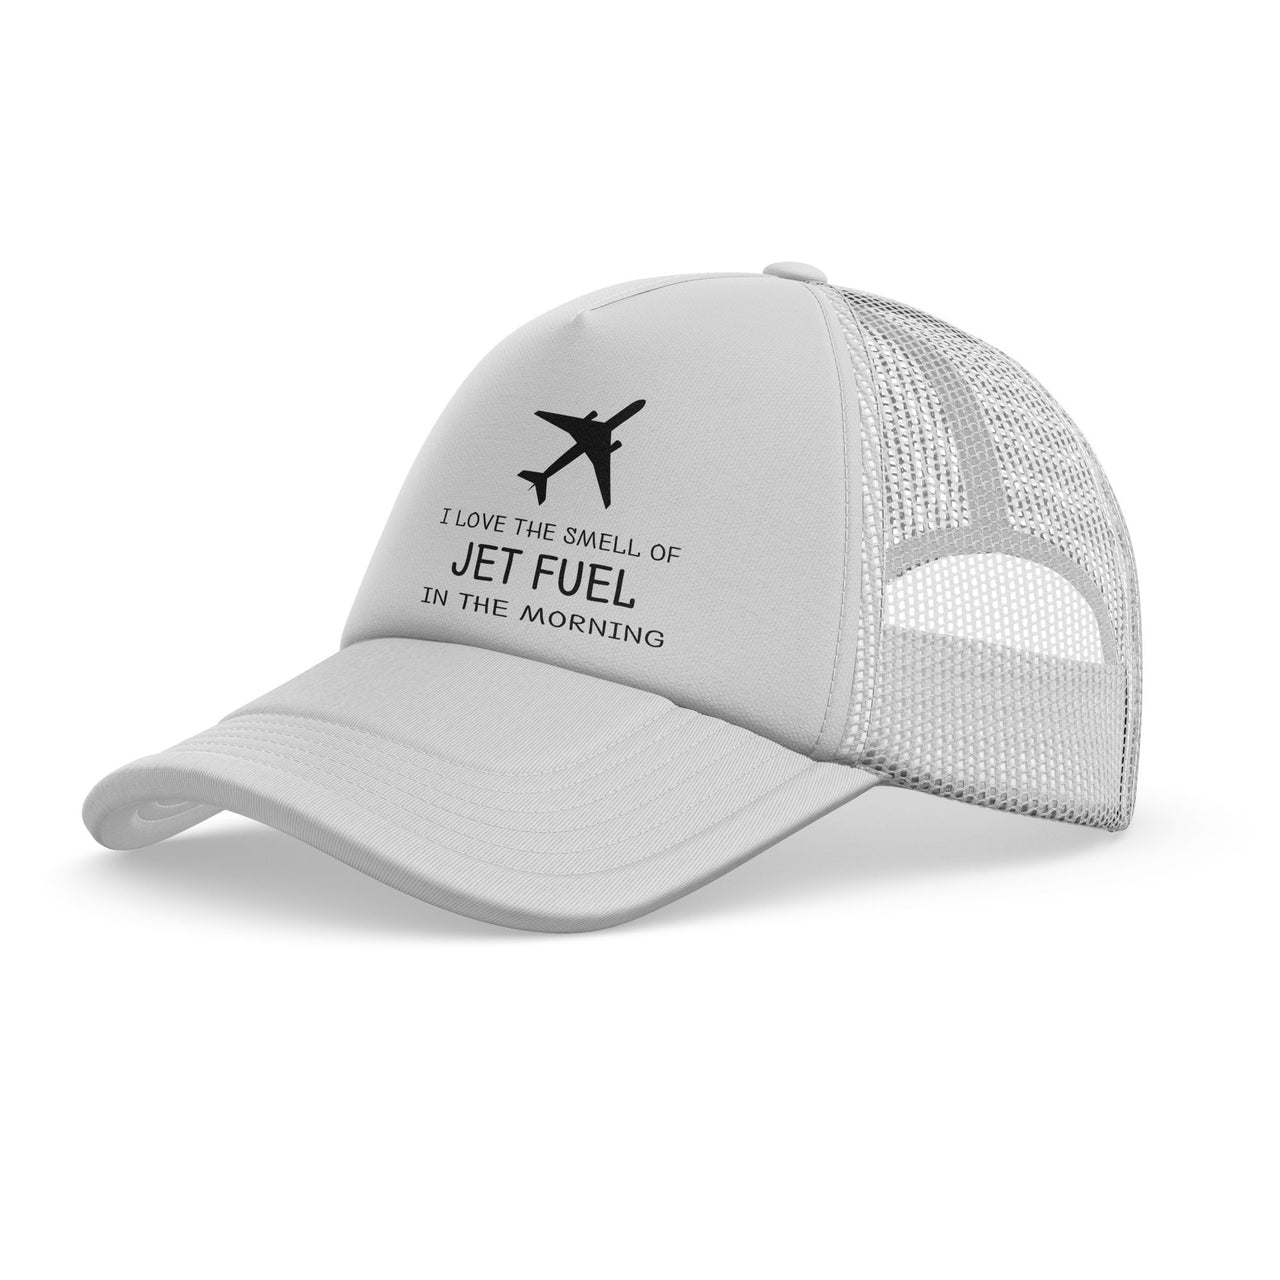 I Love The Smell Of Jet Fuel In The Morning Designed Trucker Caps & Hats